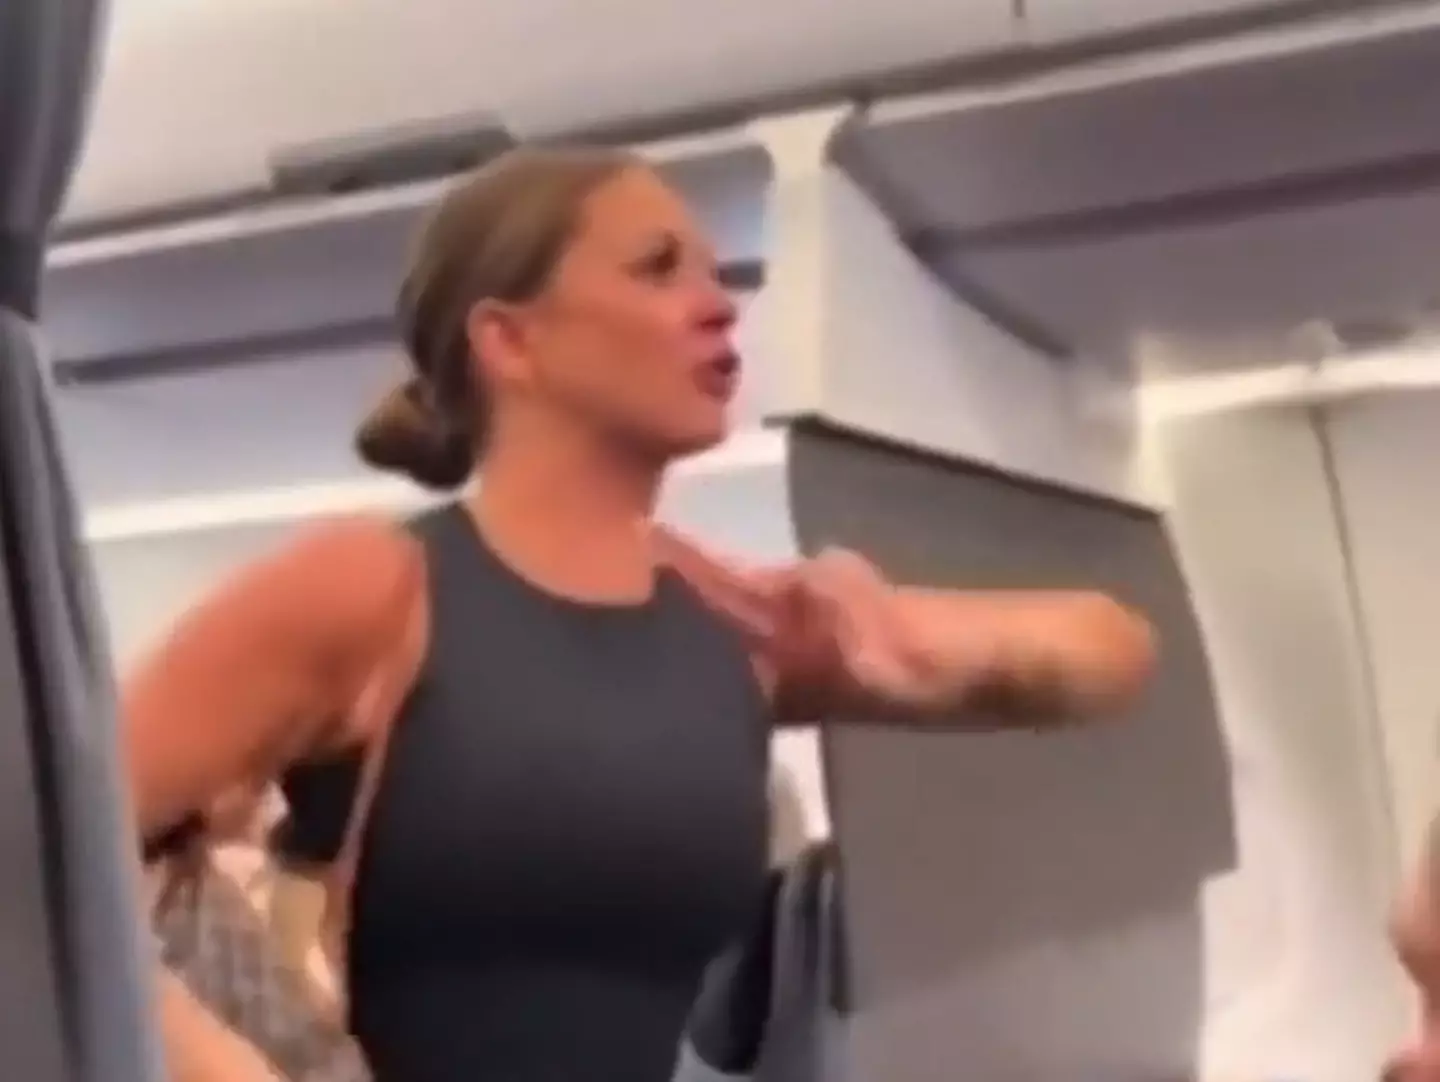 The woman's rant got her removed from the plane and she wasn't allowed back on.